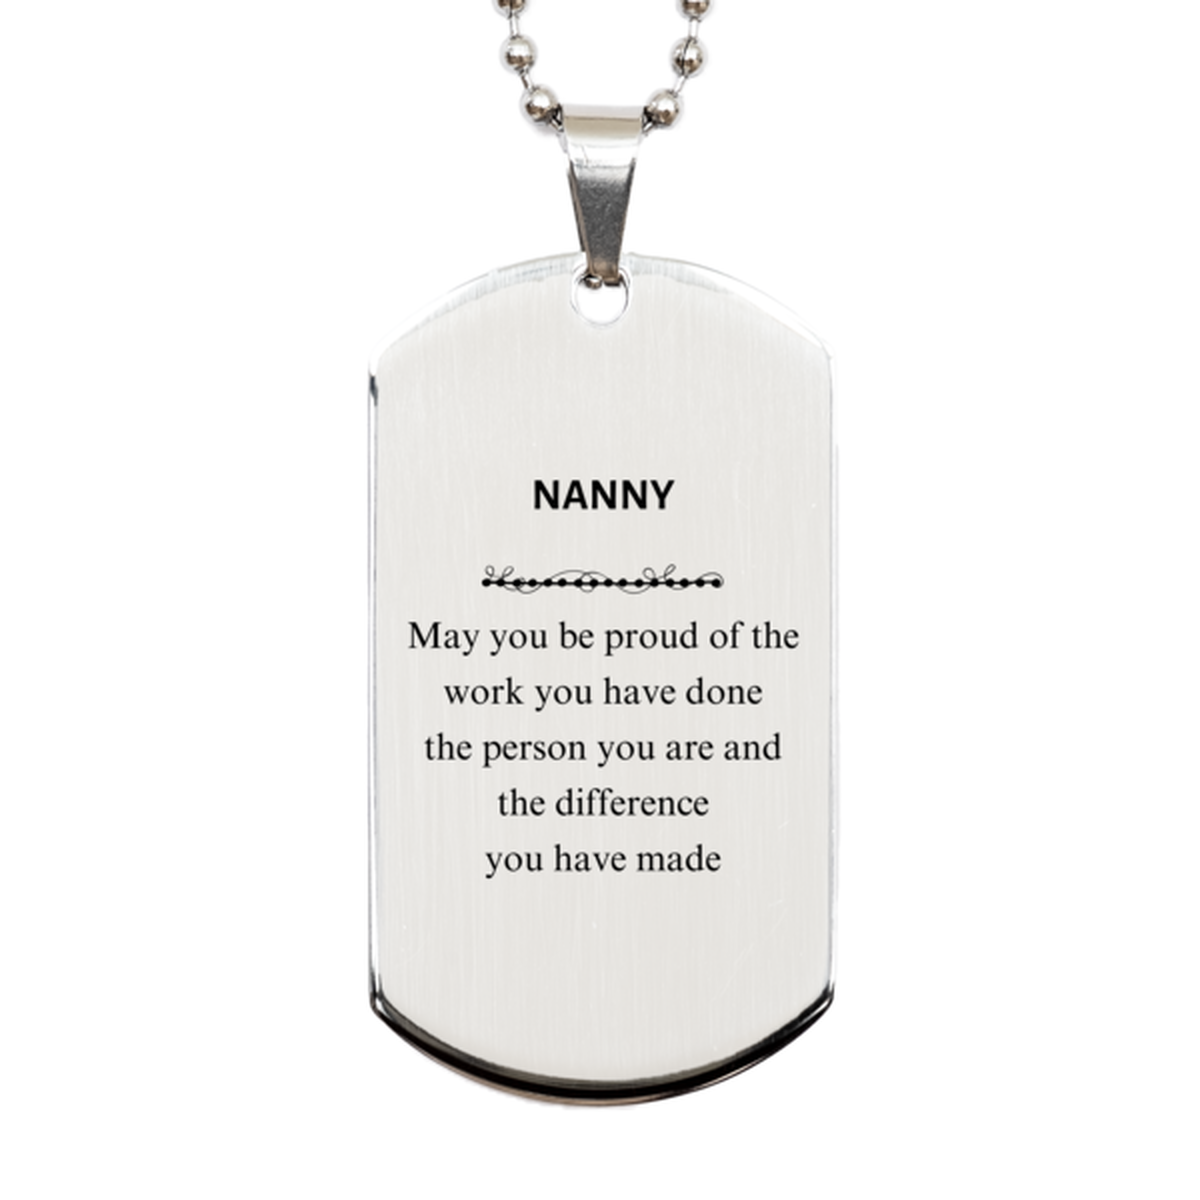 Nanny May you be proud of the work you have done, Retirement Nanny Silver Dog Tag for Colleague Appreciation Gifts Amazing for Nanny